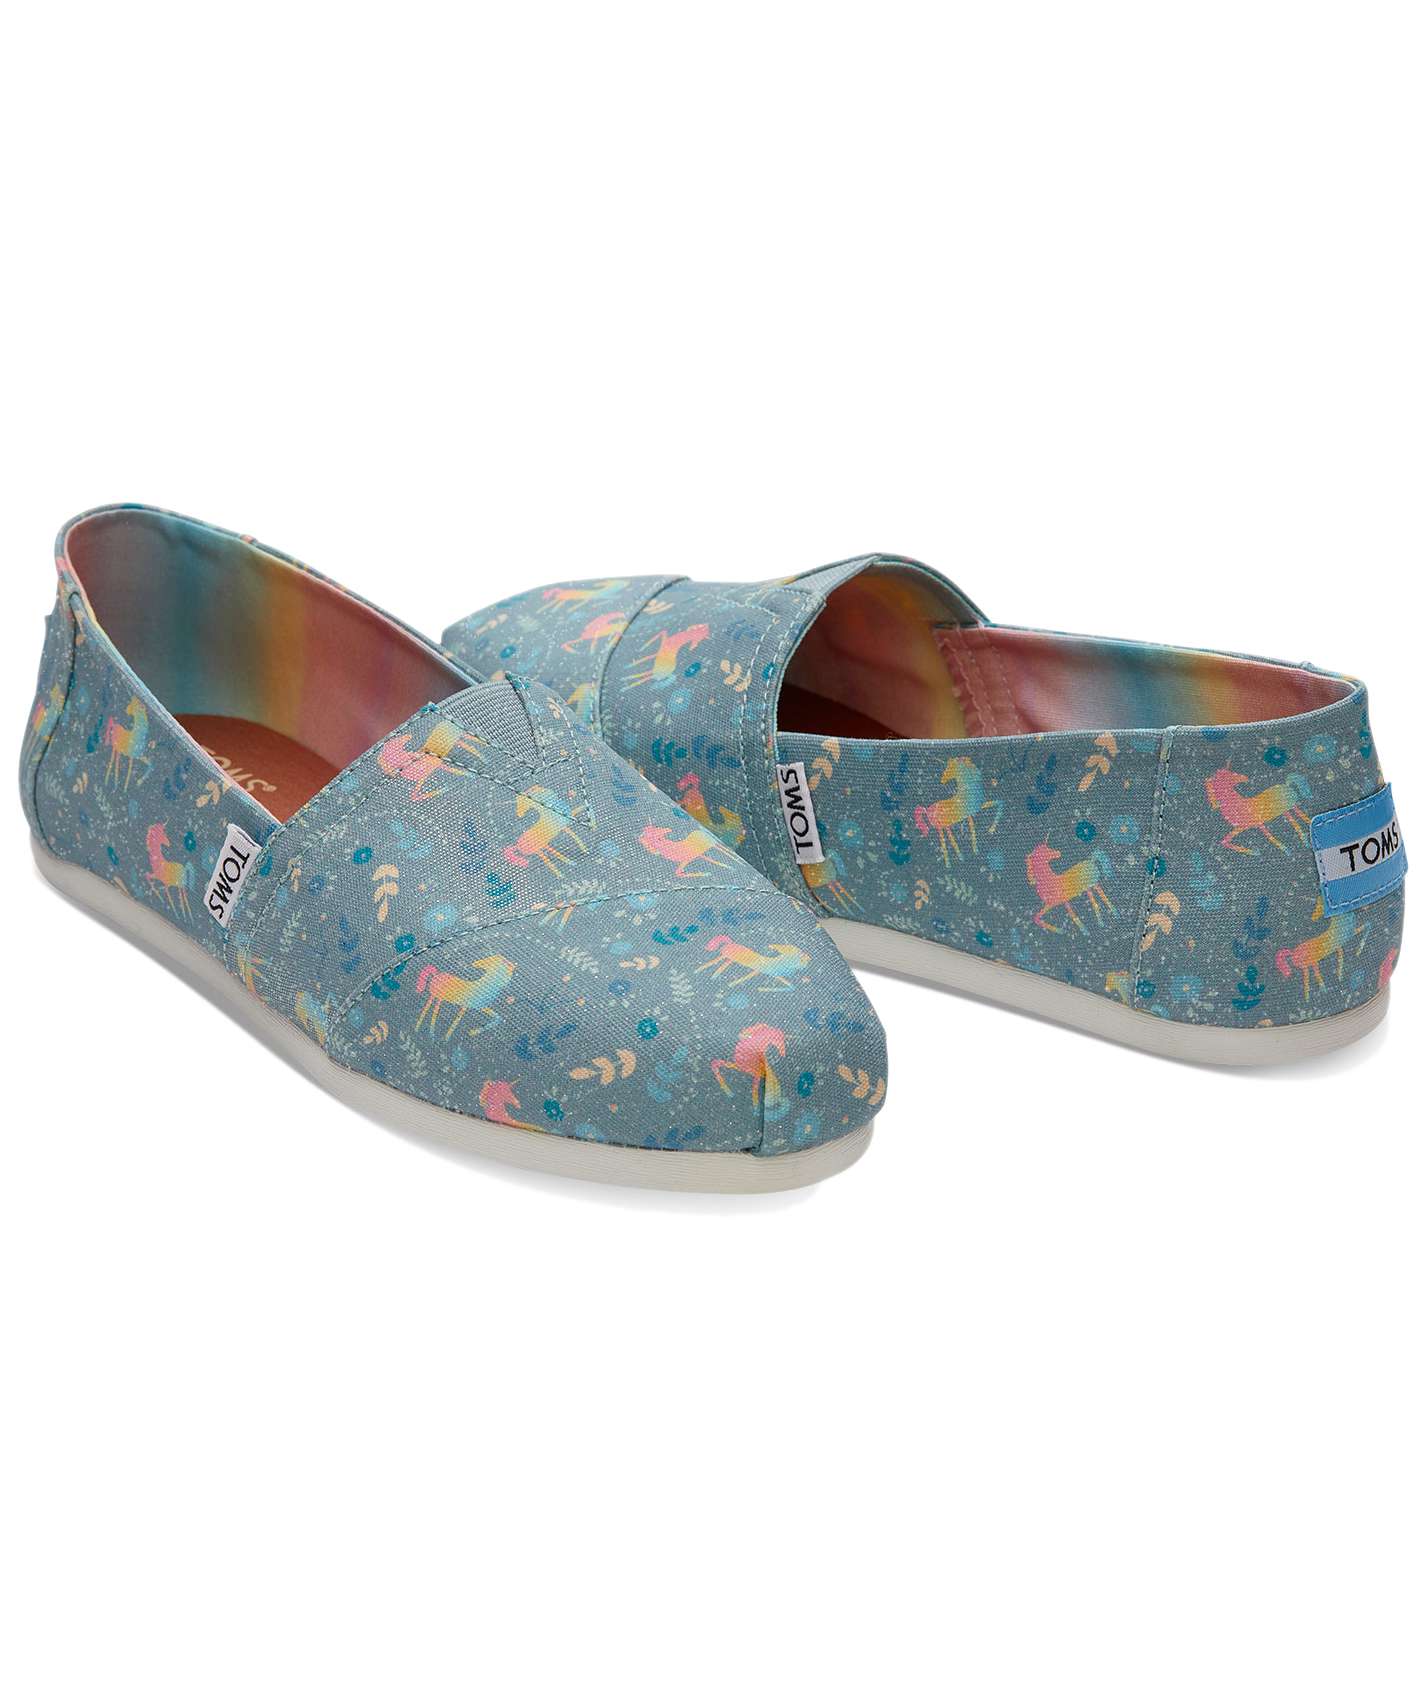 TOMS Just Launched Unicorn Shoes 